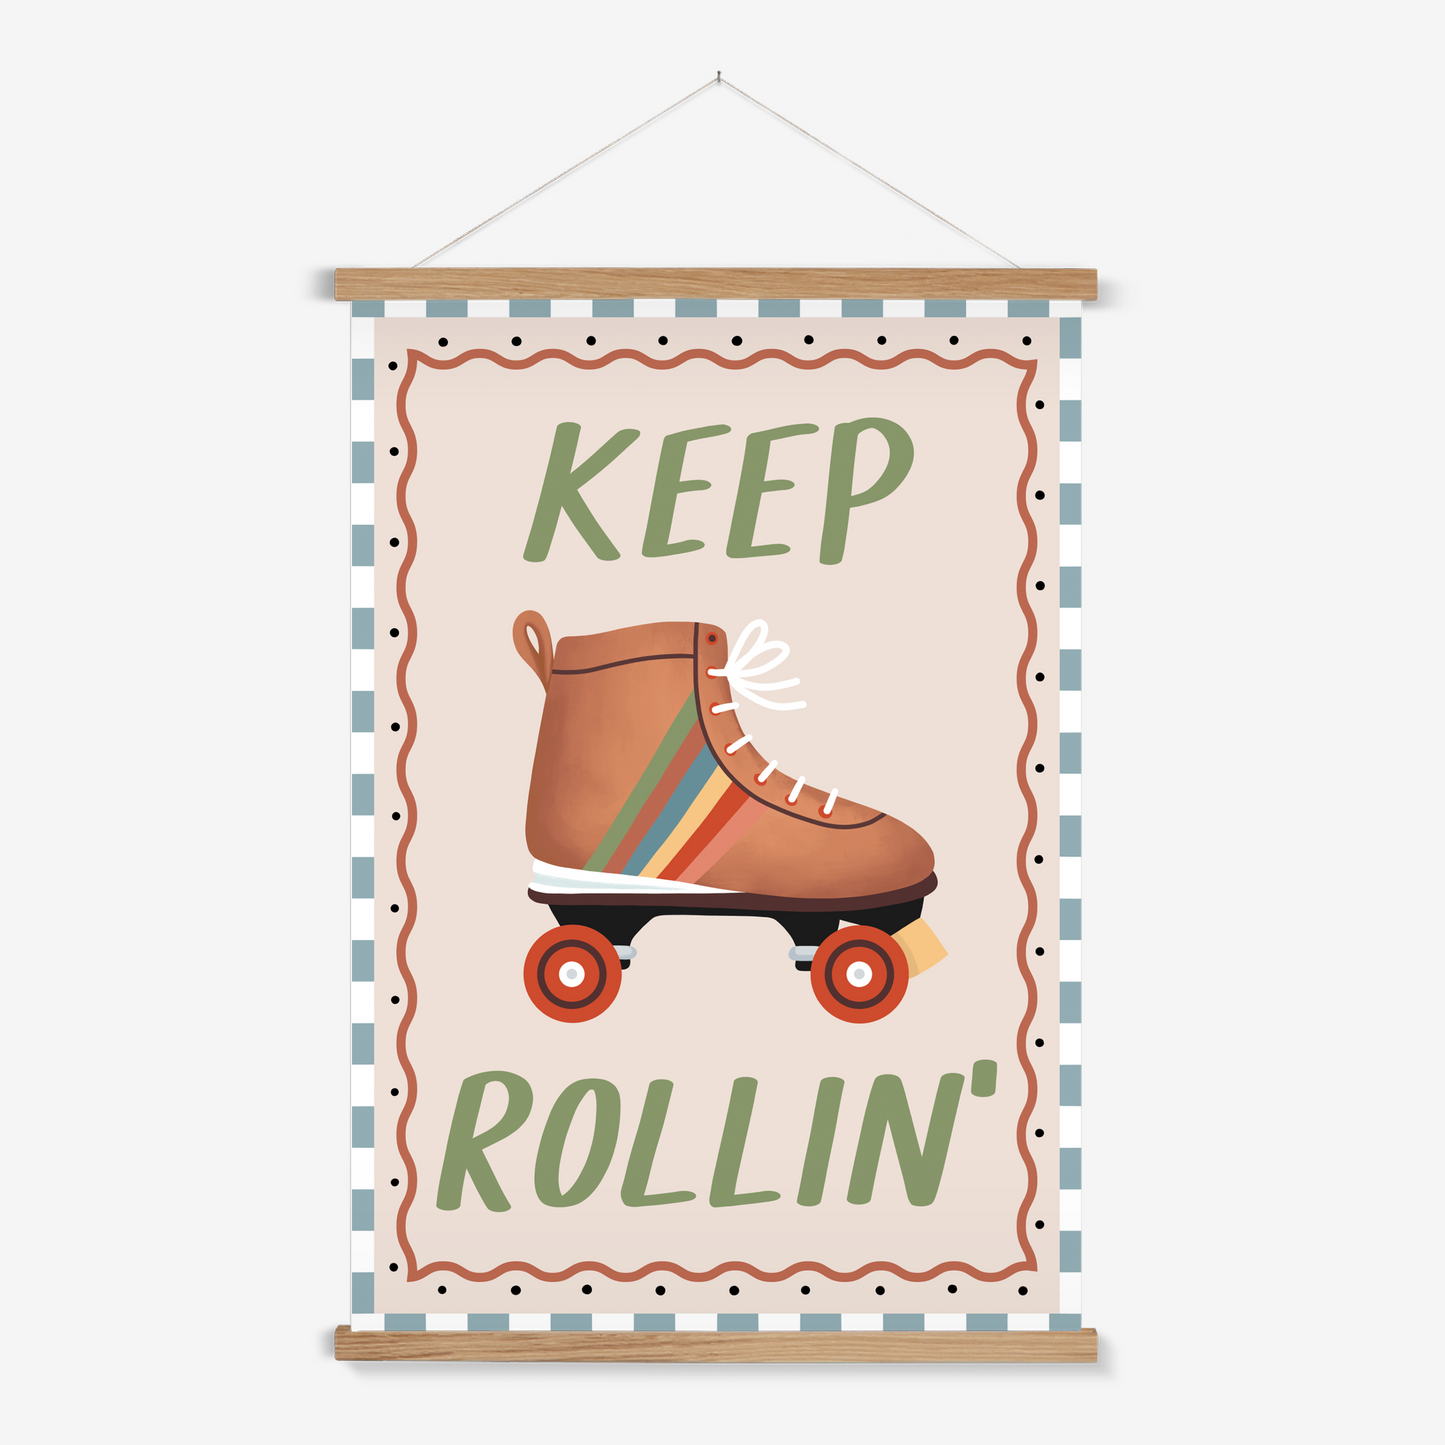 Keep Rollin' / Print with Hanger